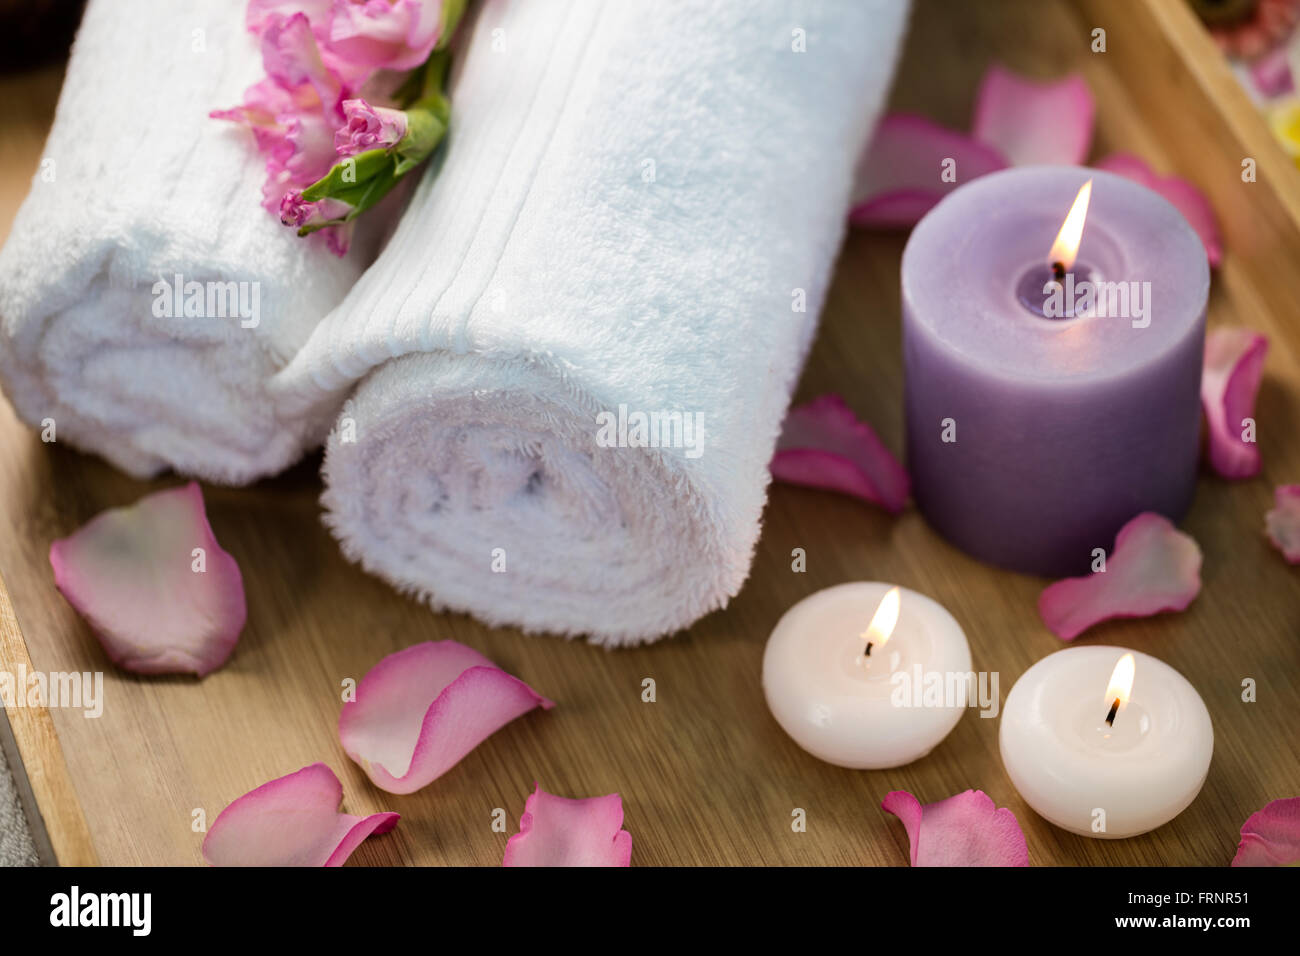 Tray of beauty therapy items Stock Photo